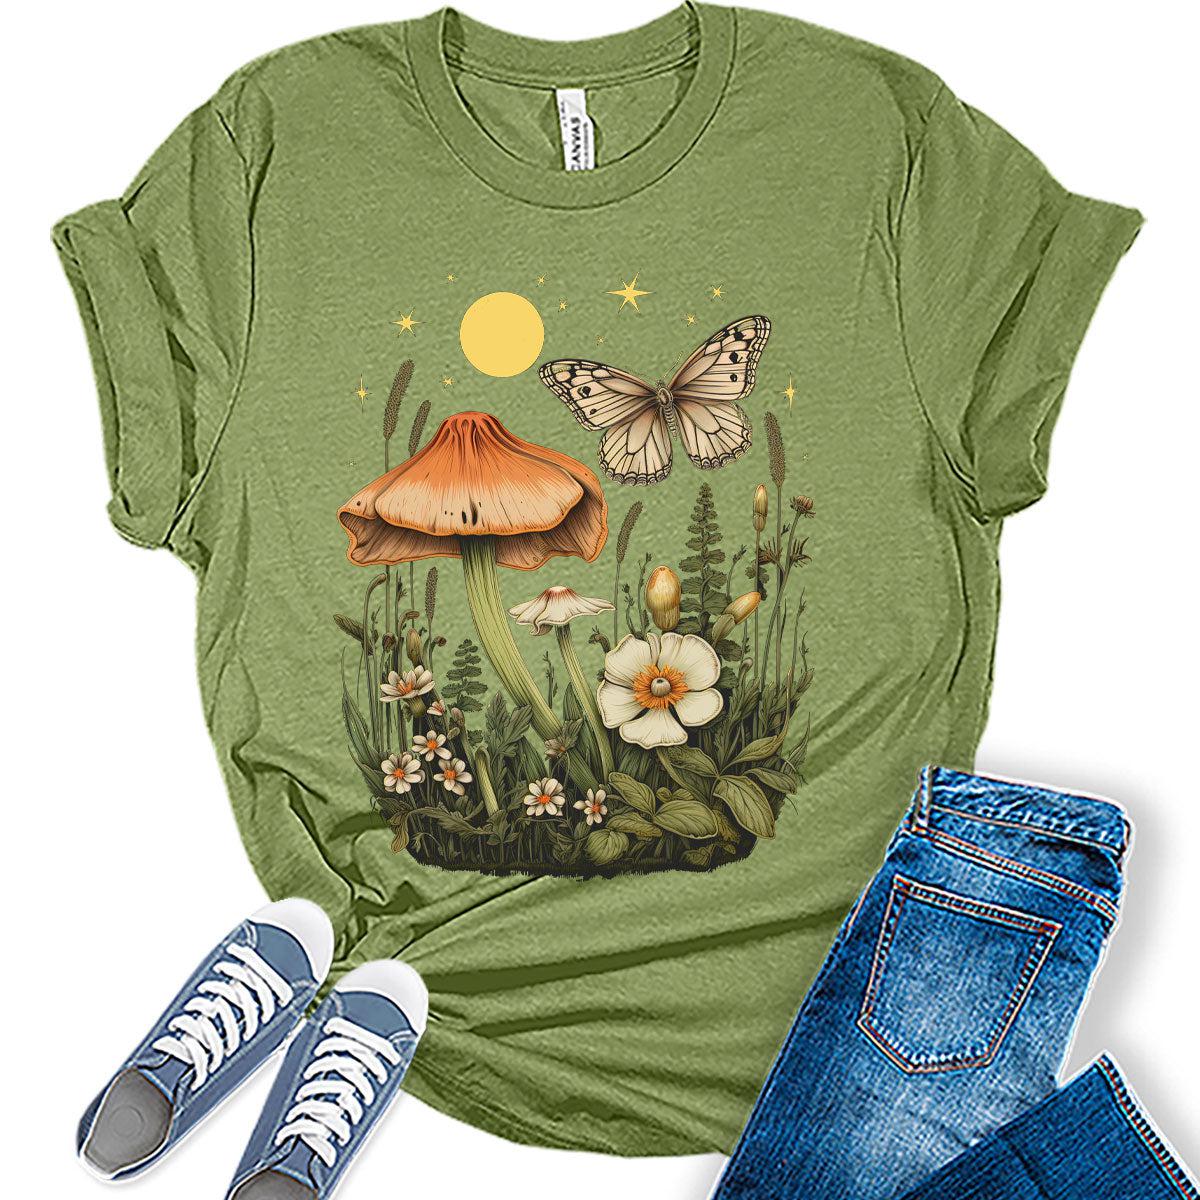 Graphic Tees for Women Short Sleeve Fall Tshirts,Womens Trendy Vintage Tops Crewneck Bella Cute Floral Wildflower Girls Shirts